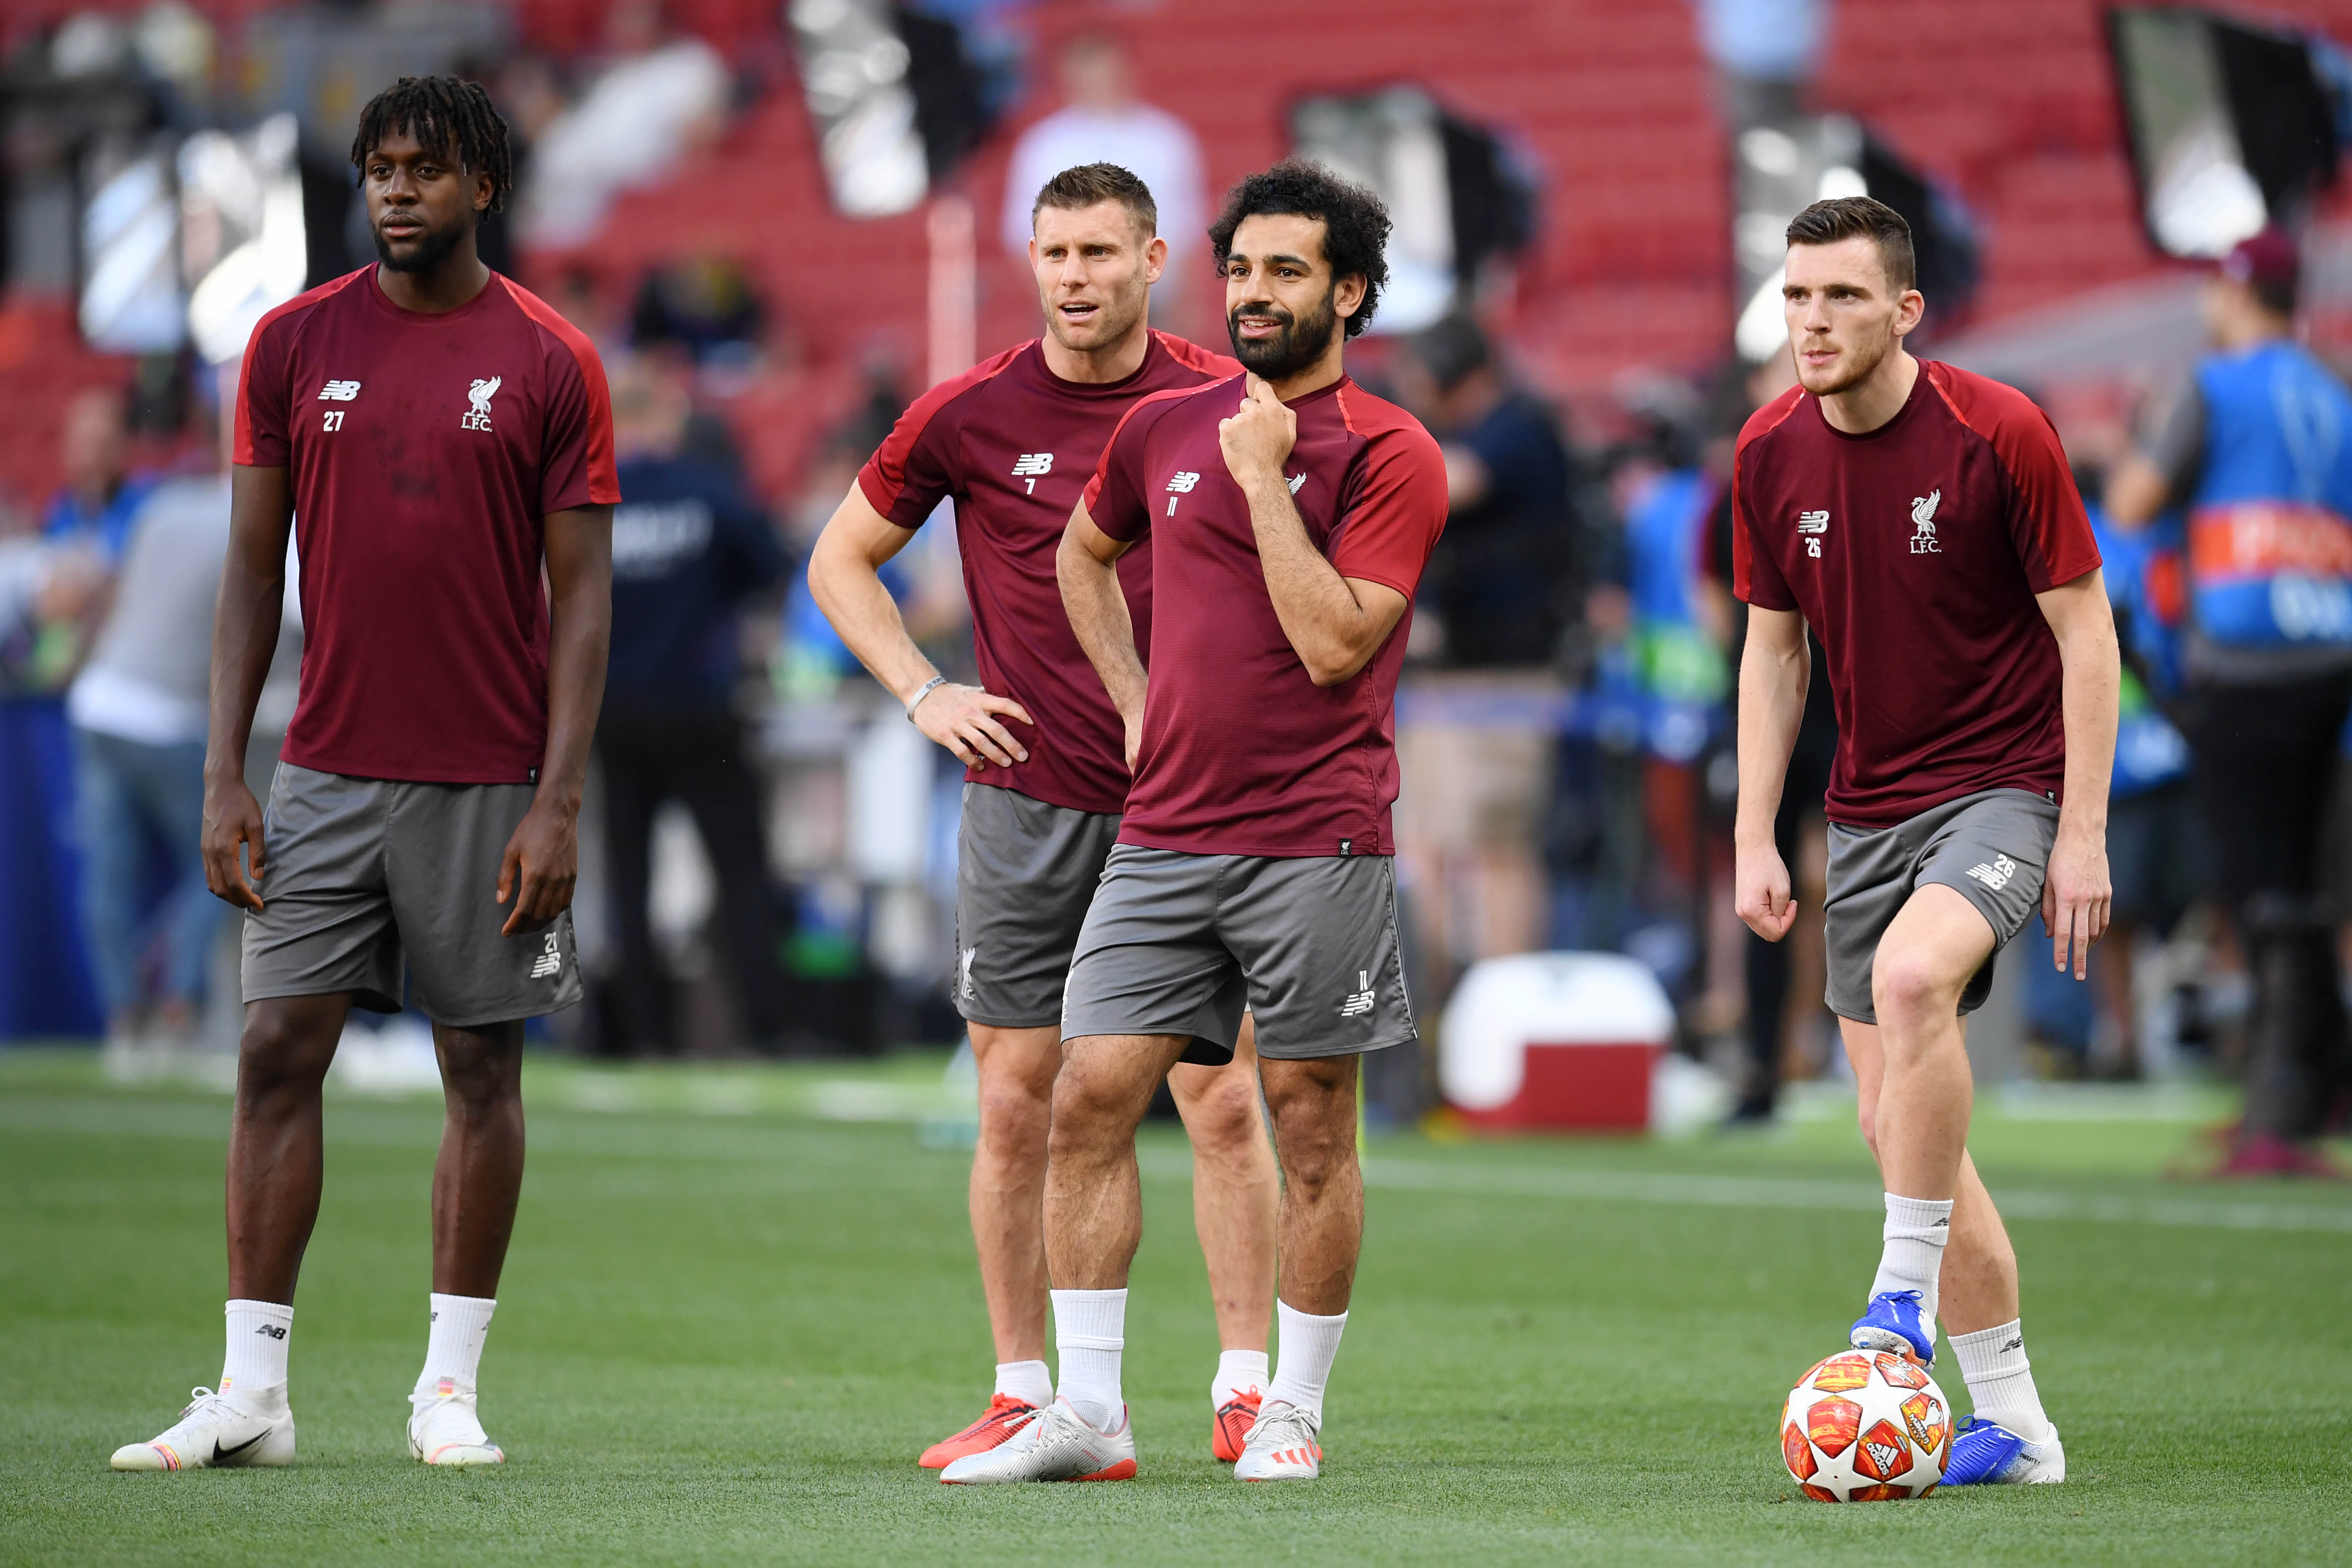 MADRID, SPAIN - MAY 31: Divock Origi, James Milner, Mohamed Salah and Andy Robertson of Liverpool look on during the Liverpool FC training session on the eve of the UEFA Champions League Final against Tottenham Hotspur at Estadio Wanda Metropolitano on May 31, 2019 in Madrid, Spain. (Photo by Matthias Hangst/Getty Images)